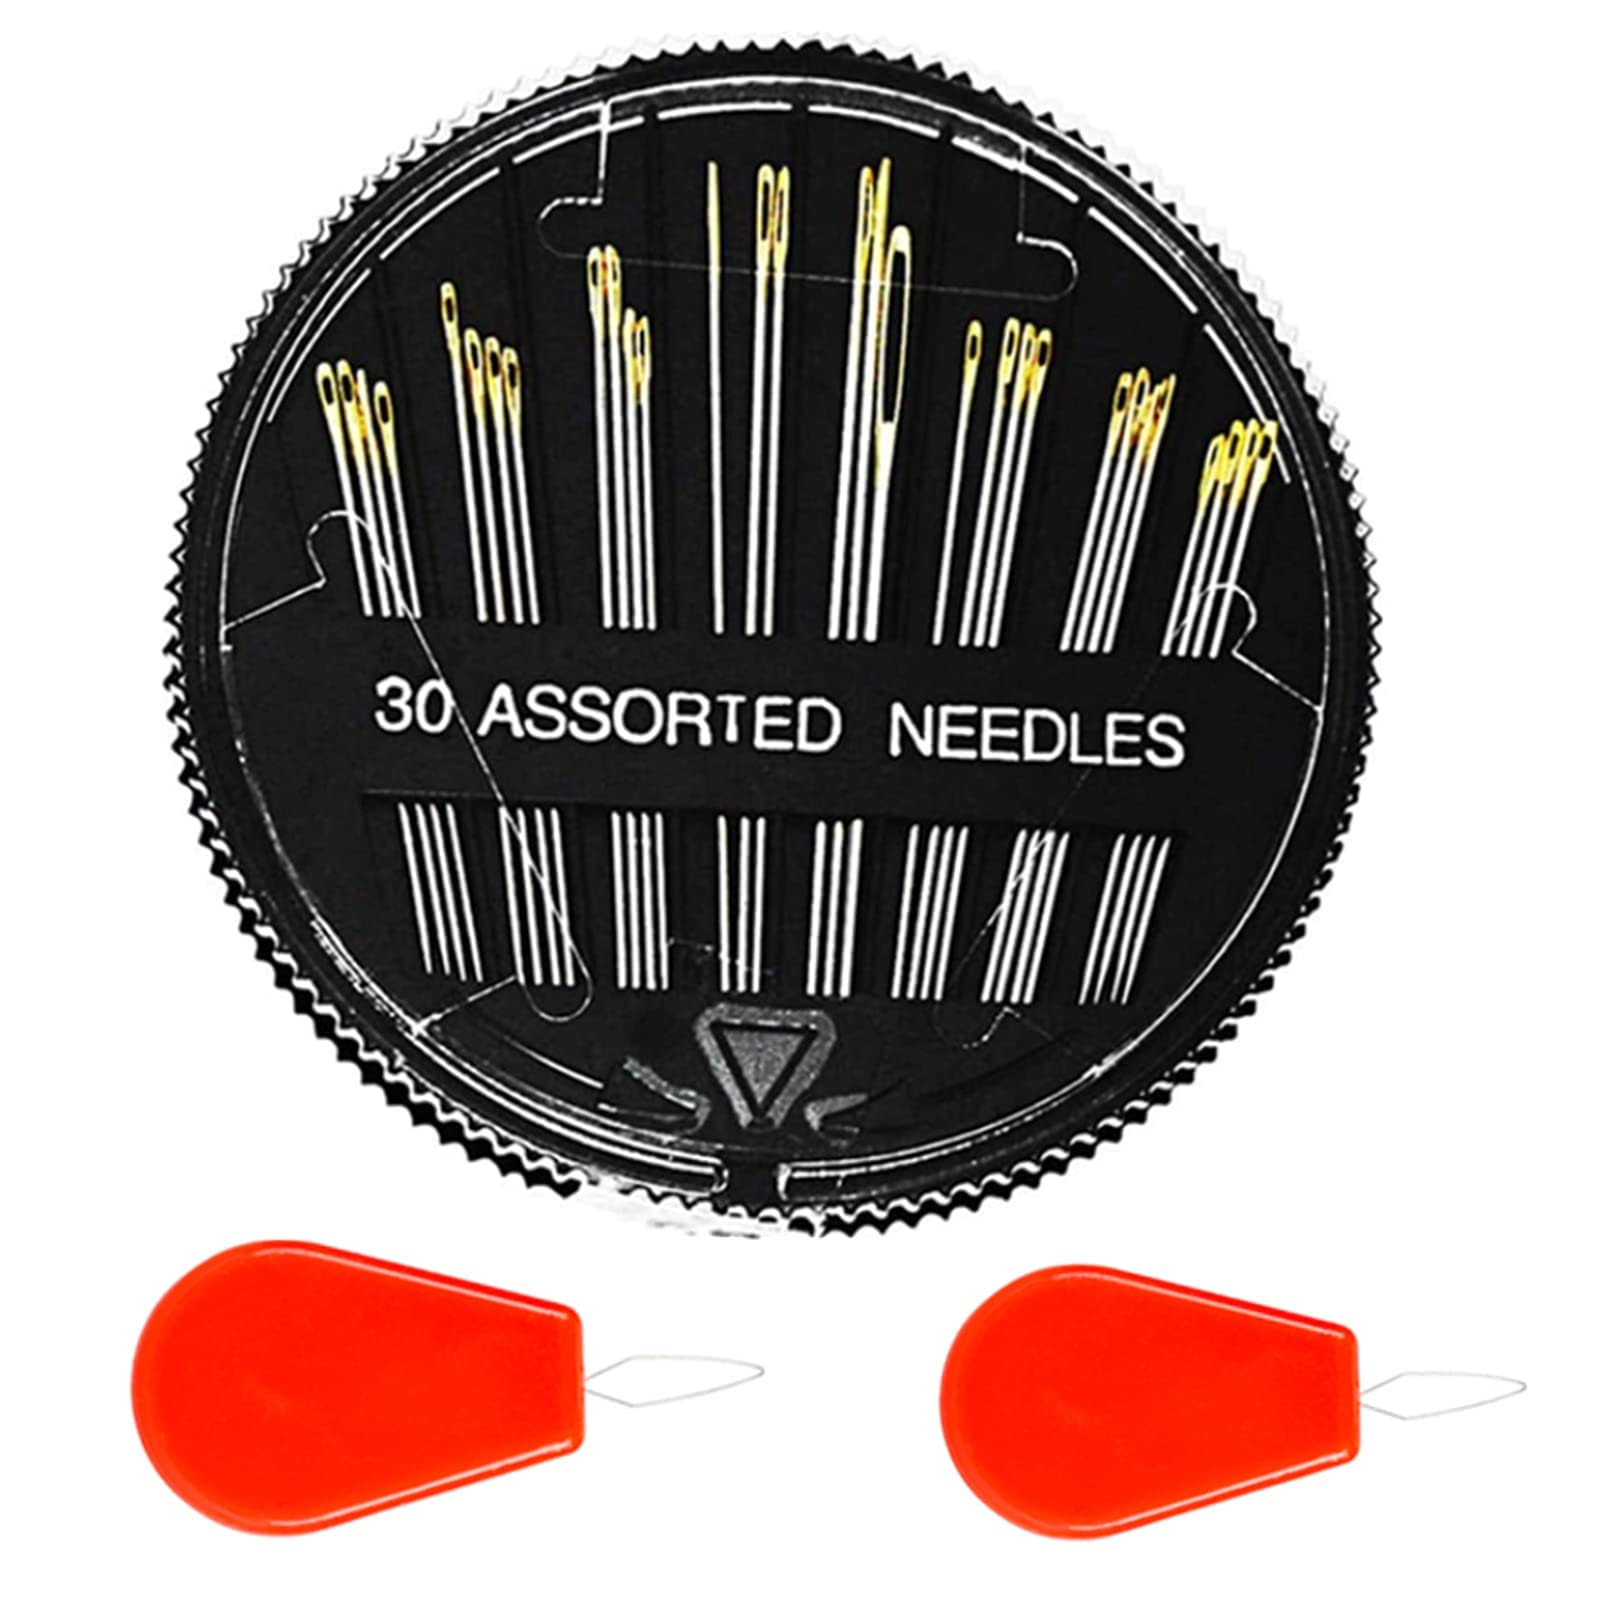 Premium Hand Sewing Needles for Sewing Repair 30-Count Assorted Embroidery  Needles with 2 Threaders Large Eye Sharp Needle Handsewing Needles Kit for  Ccross Stitch 1